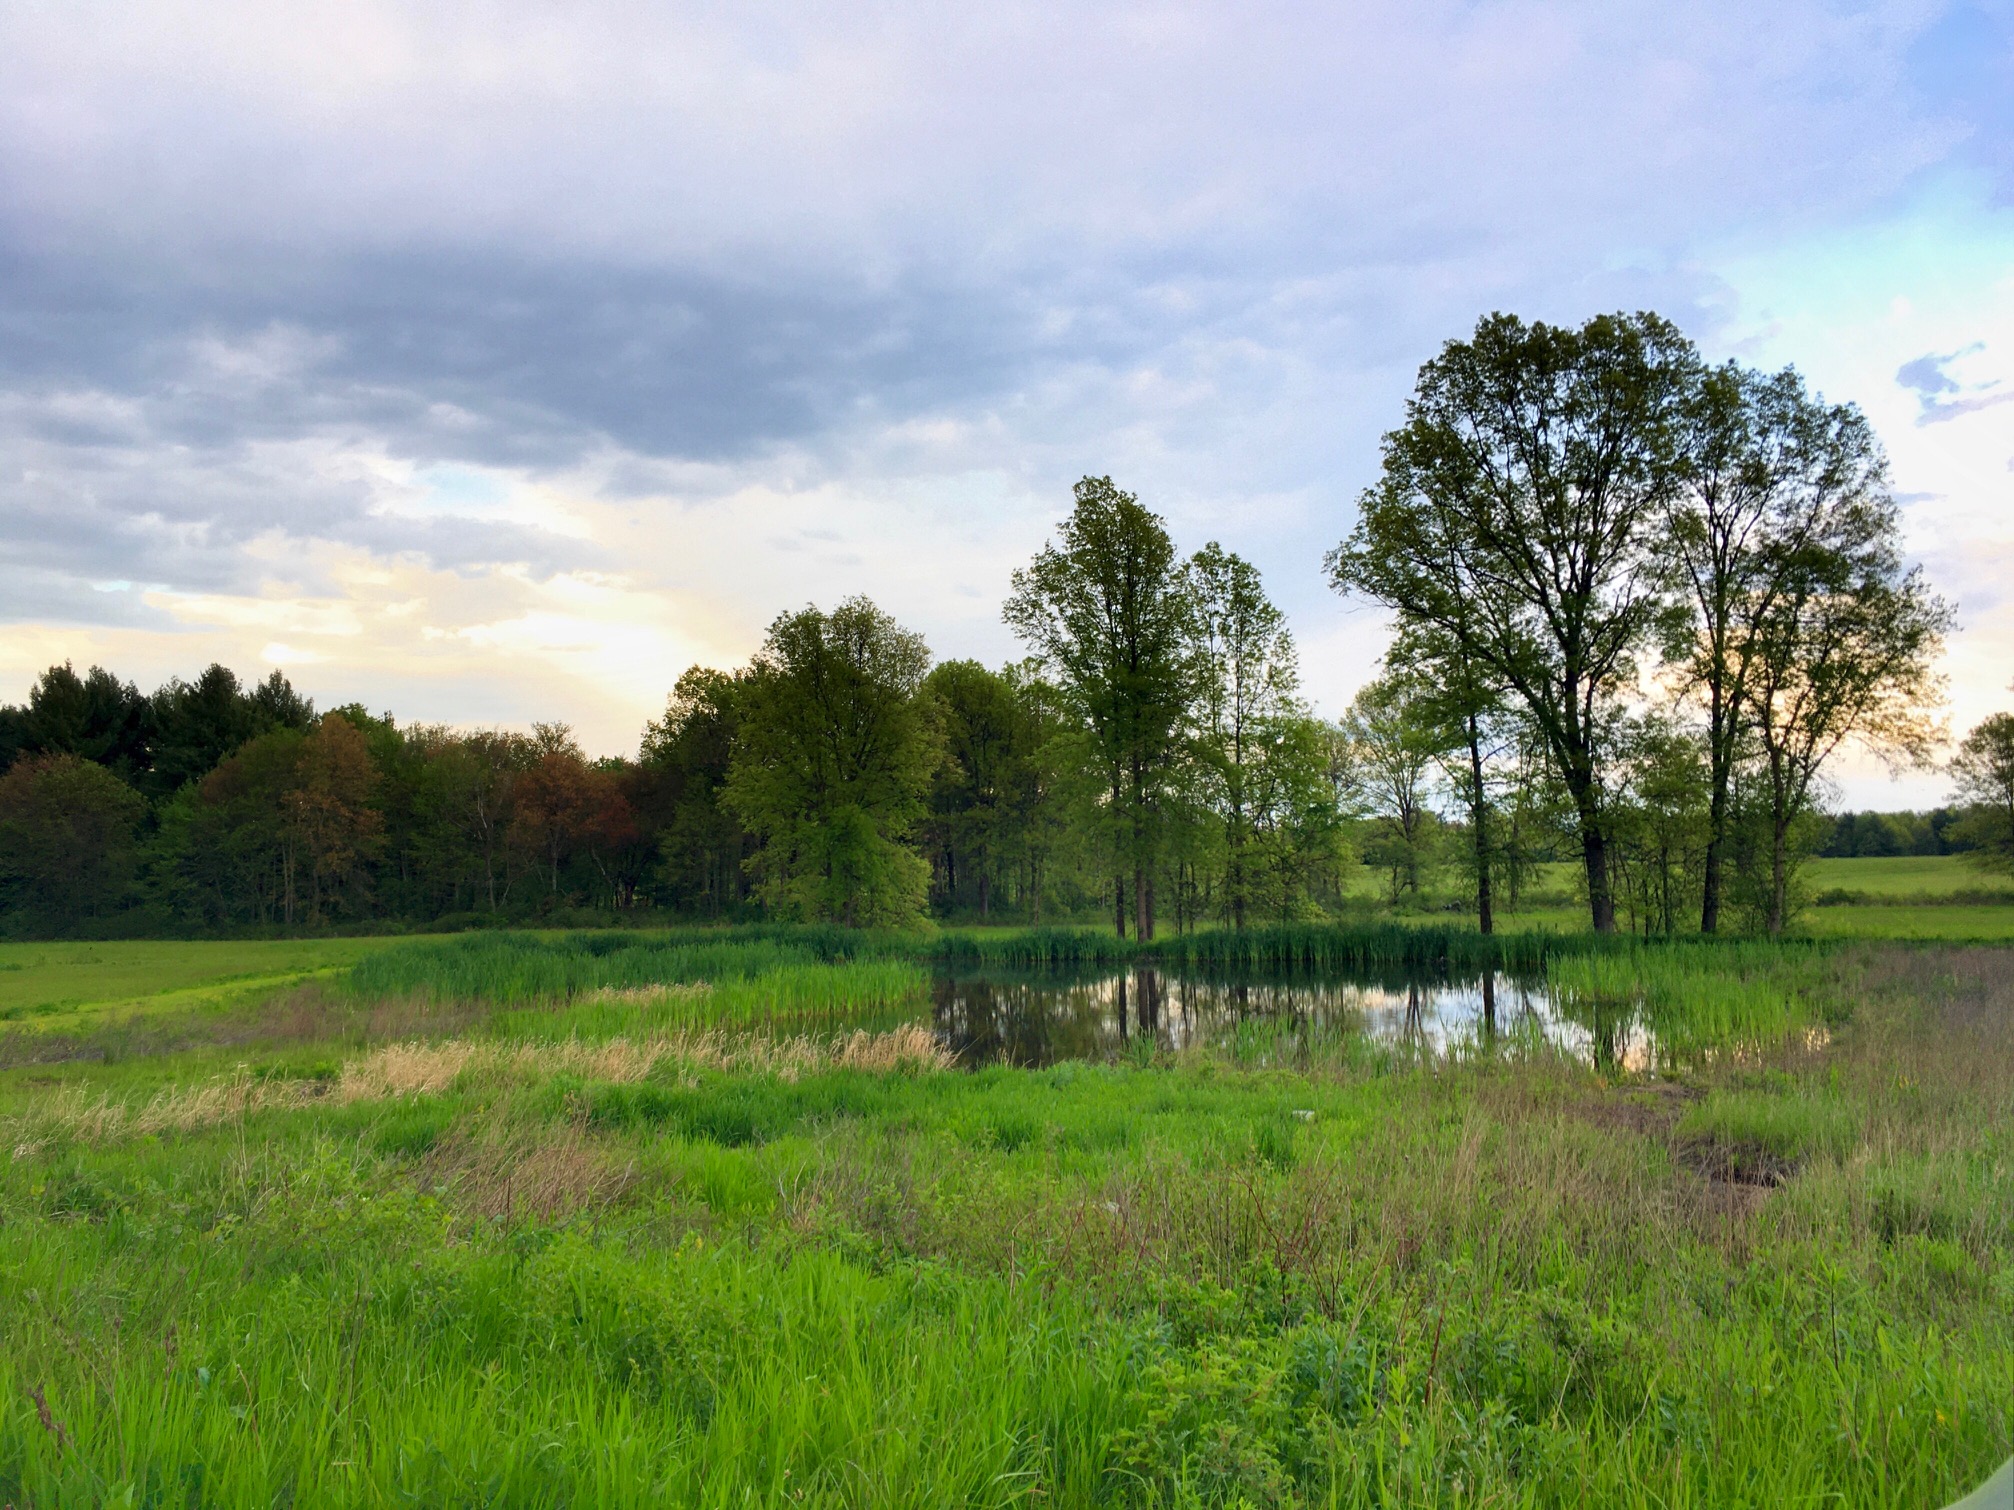 Wetland as seen from a trail at sunset. Blue-gray and orange clouds, a small pond in a green field, with trees behind it.